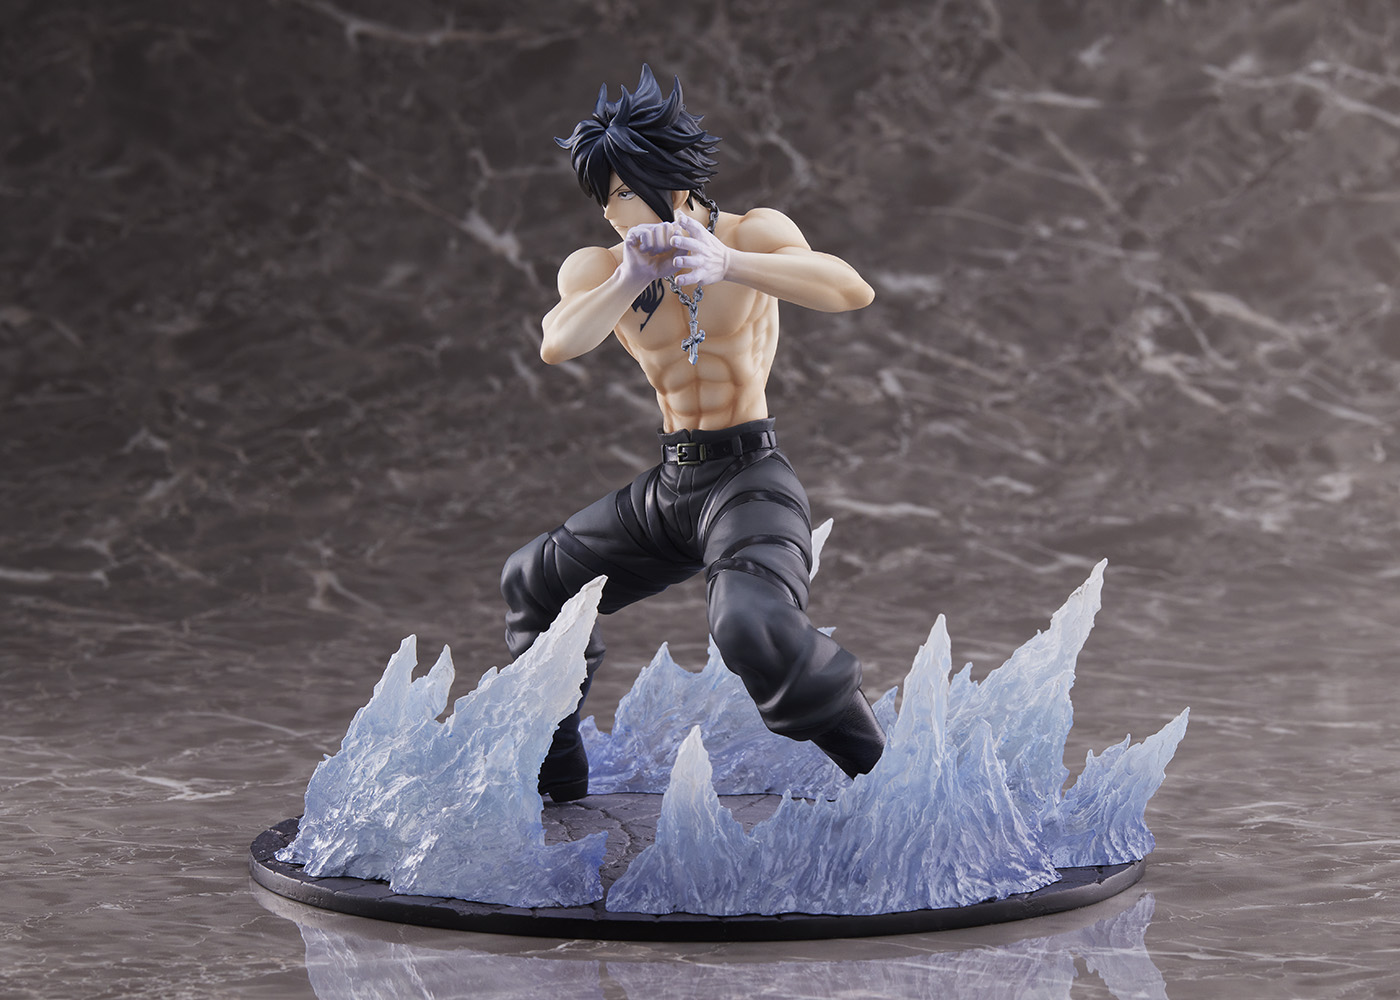 Fairy Tail x Bfull Limited 1/6 Scale Gray Fullbuster Figurine